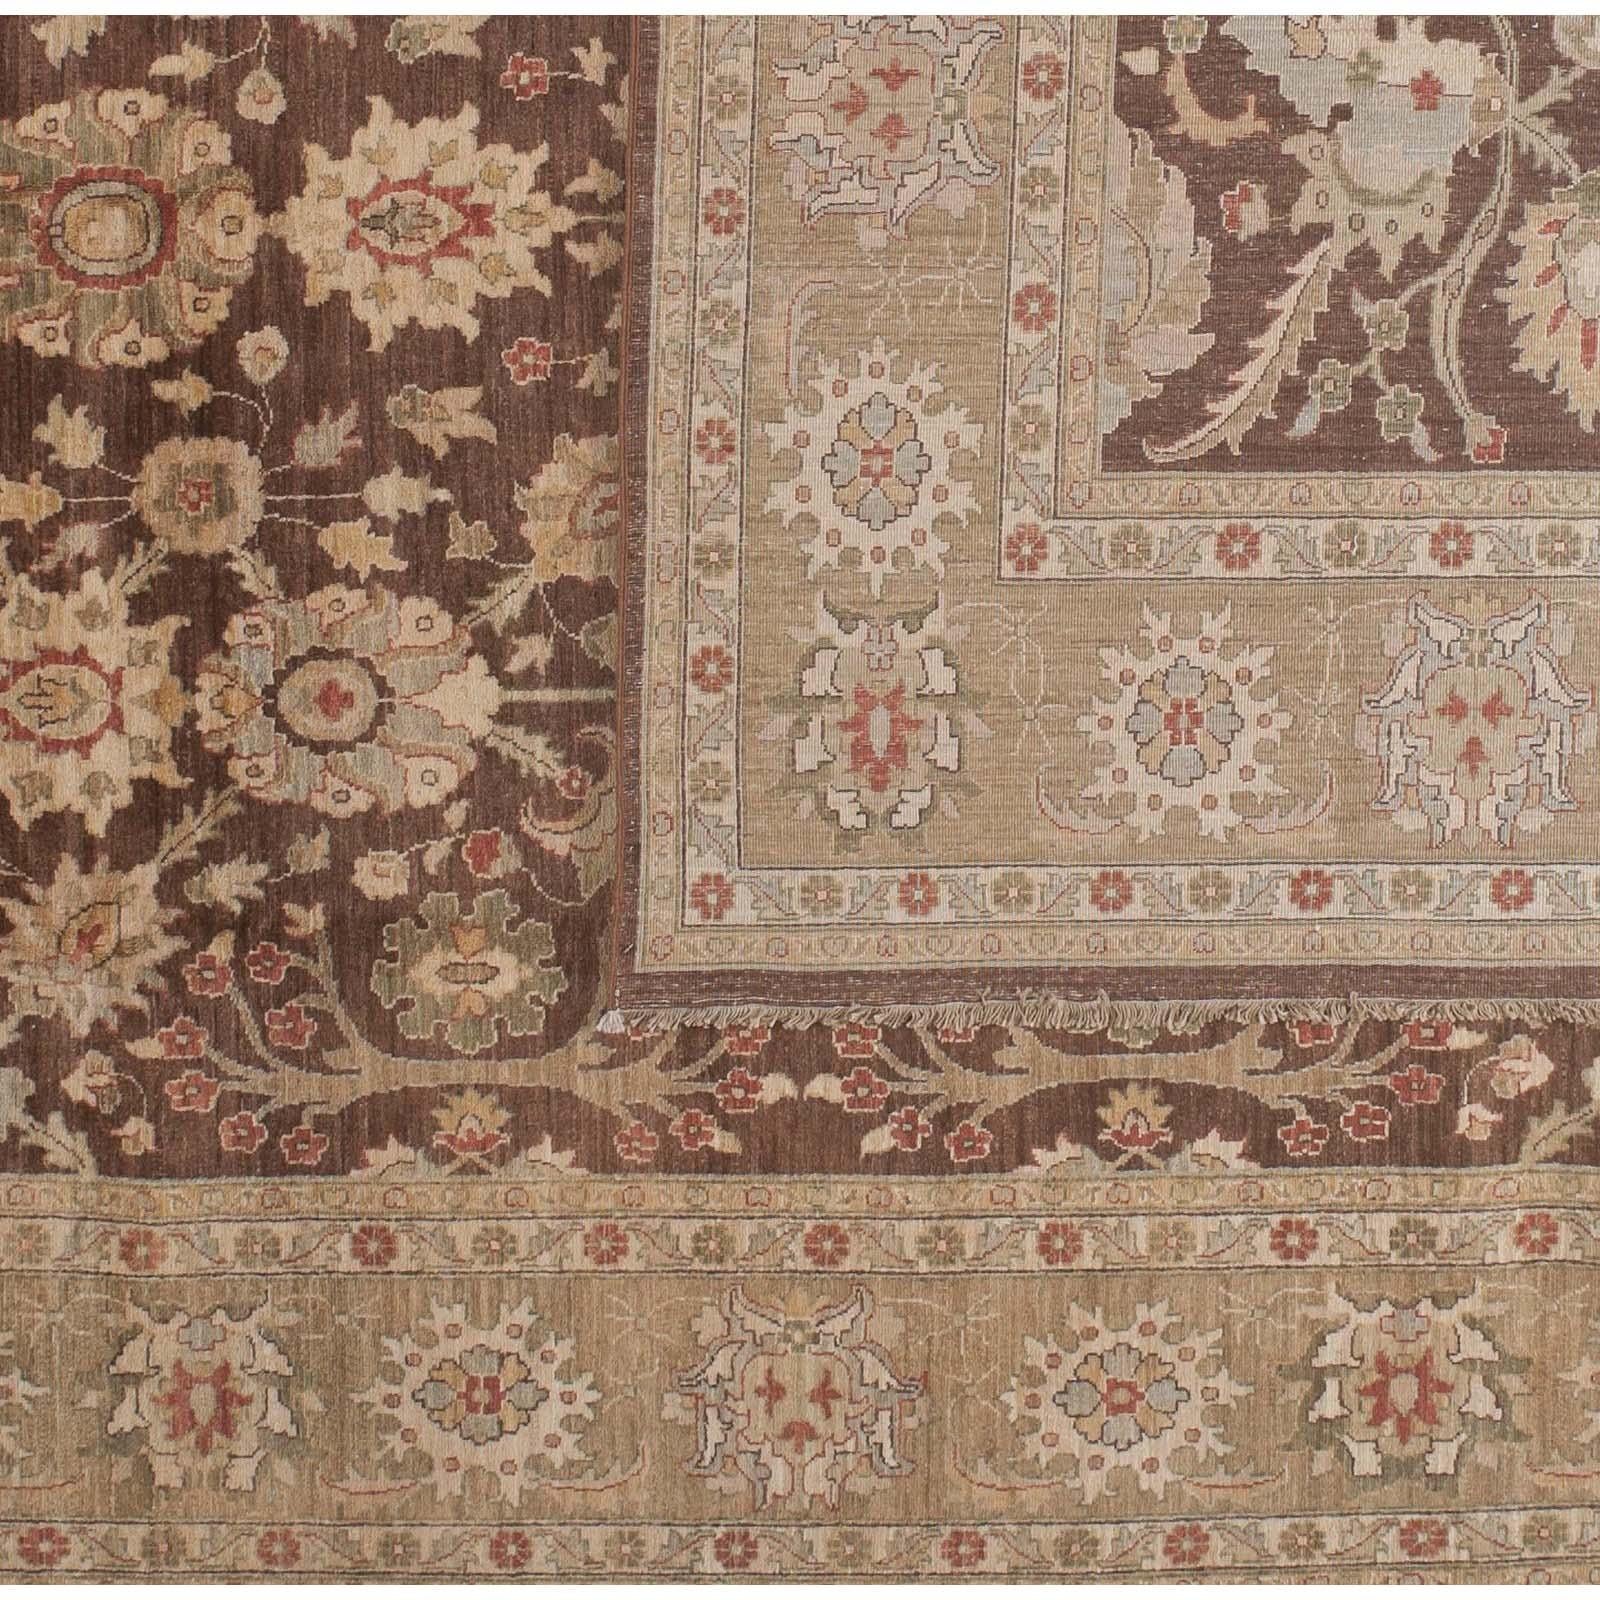 A bold brown center with floral design surrounded by a wide beige border creates an elegant and finely balanced piece. Wool. Hand knotted in Pakistan using vegetal dyes.